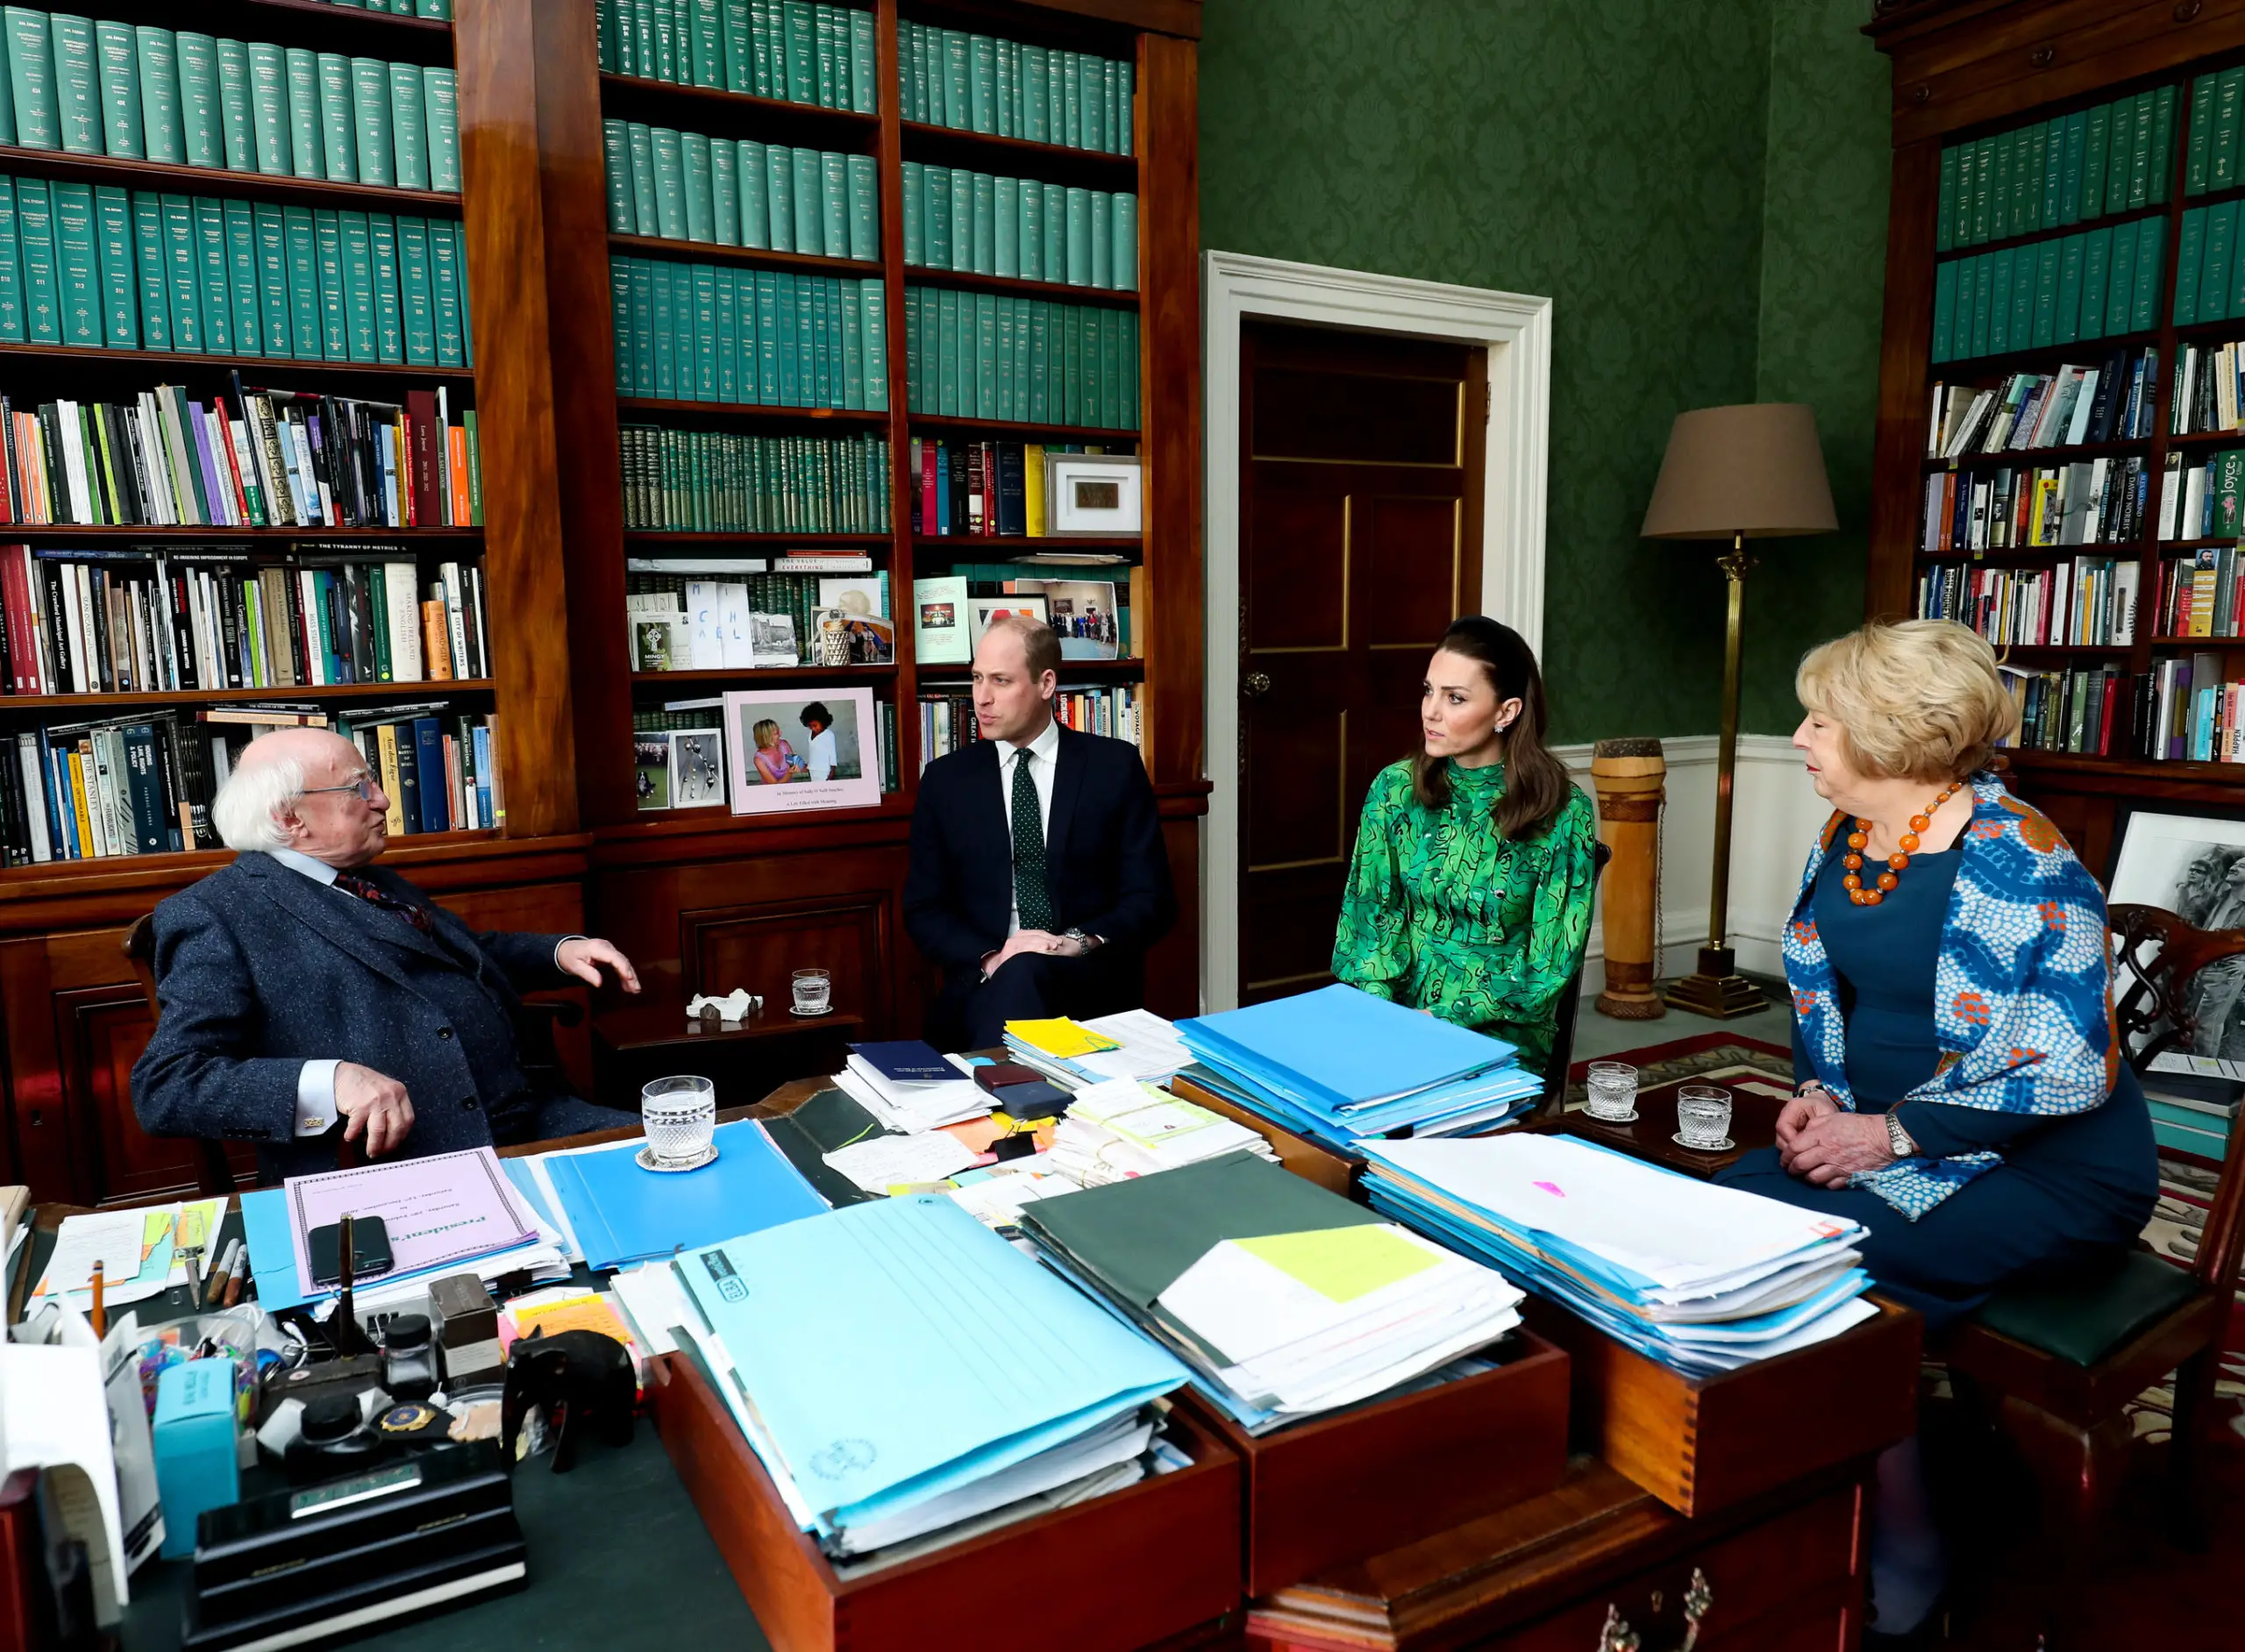 Welcoming the Duke and Duchess of Cambridge, the Irish President Office issued a statement